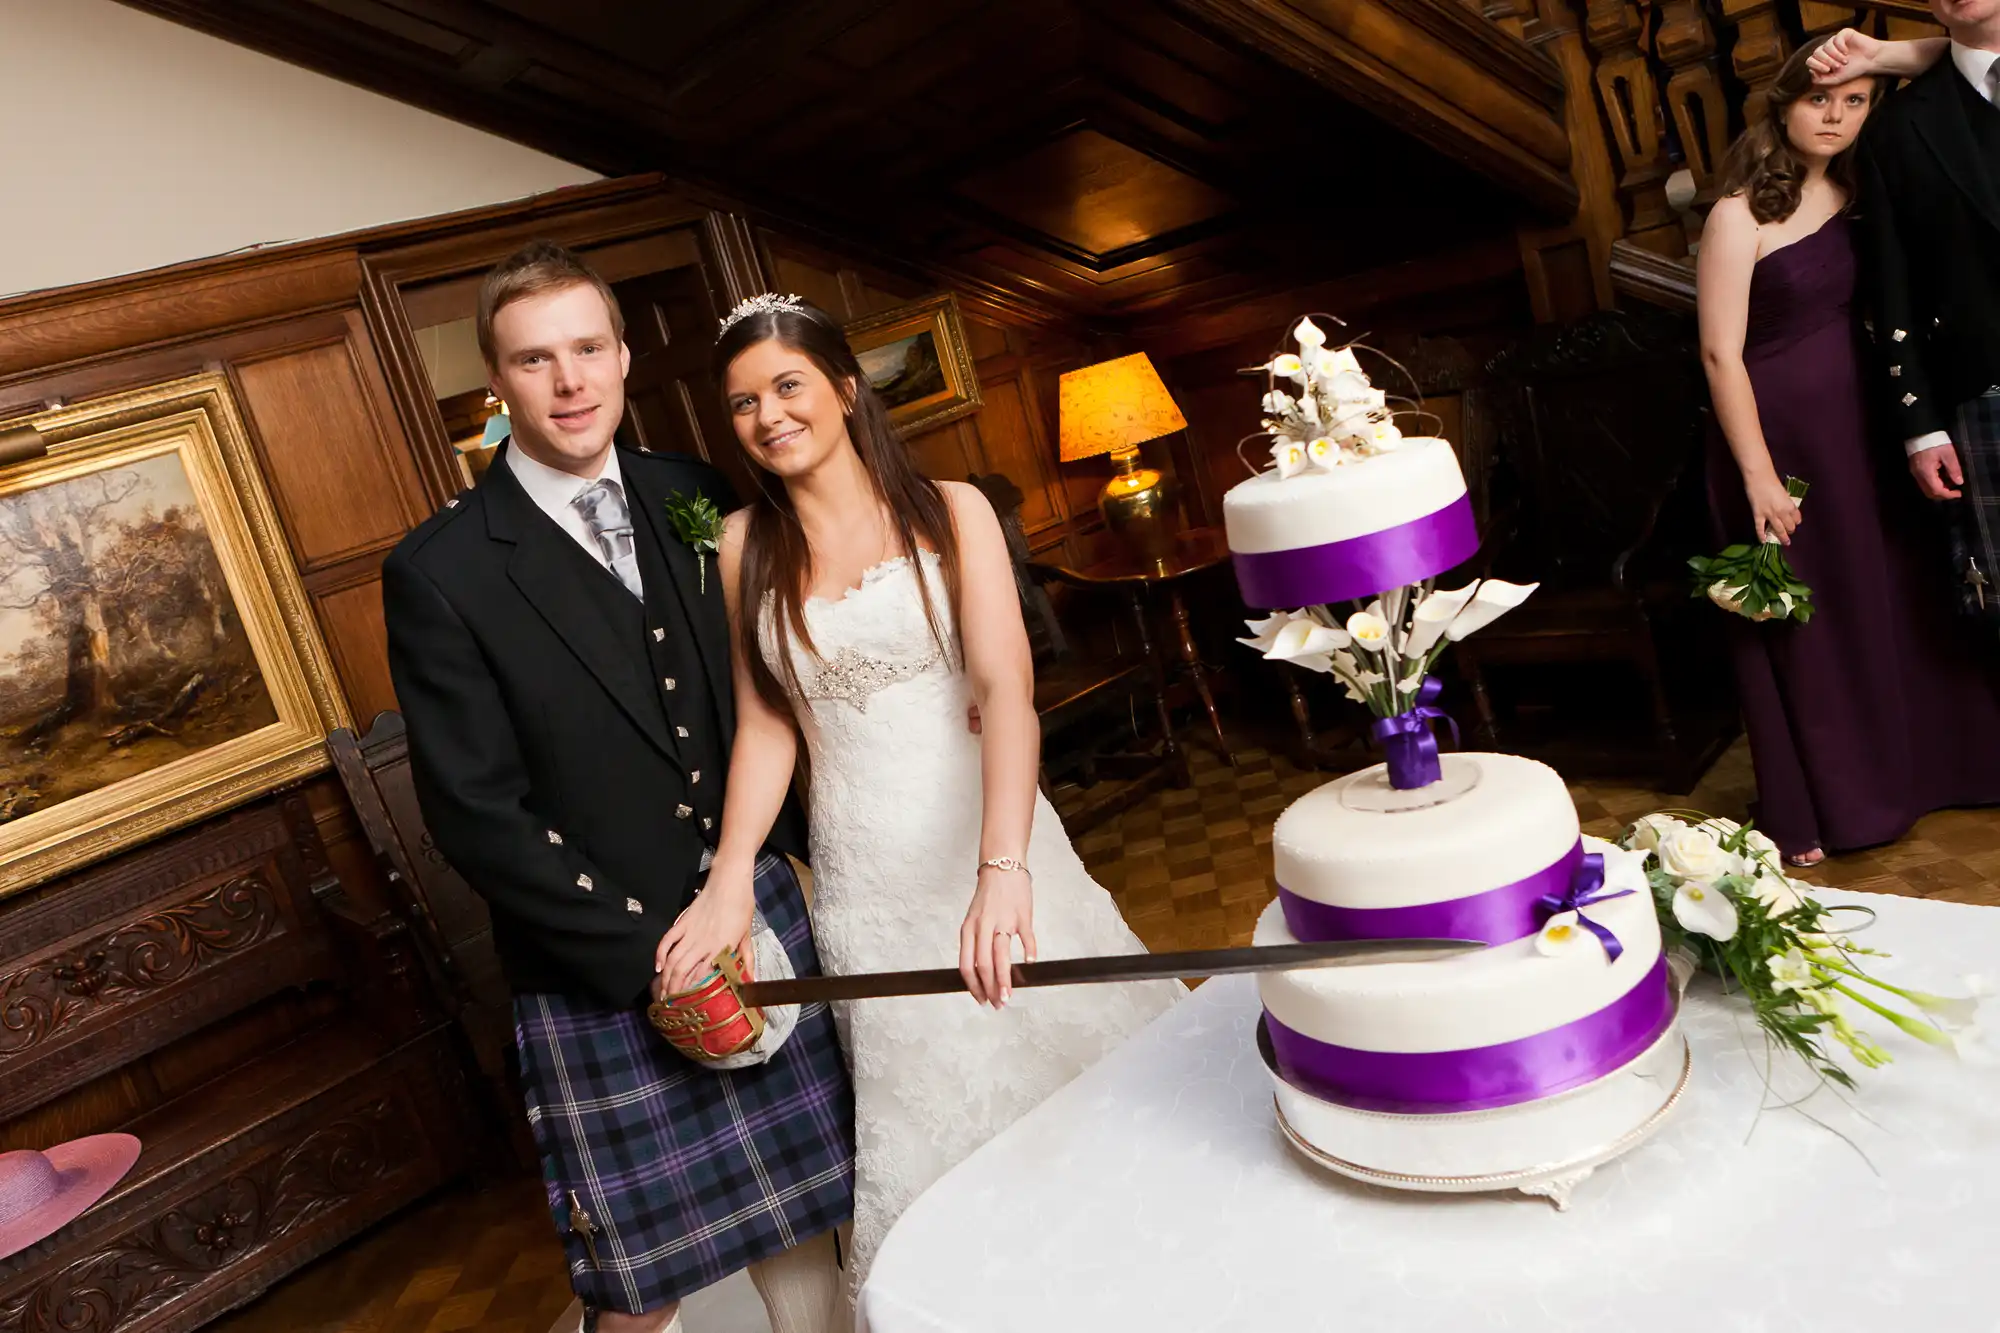 A bride and groom in formal attire cut a white and purple wedding cake in an elegantly decorated room.